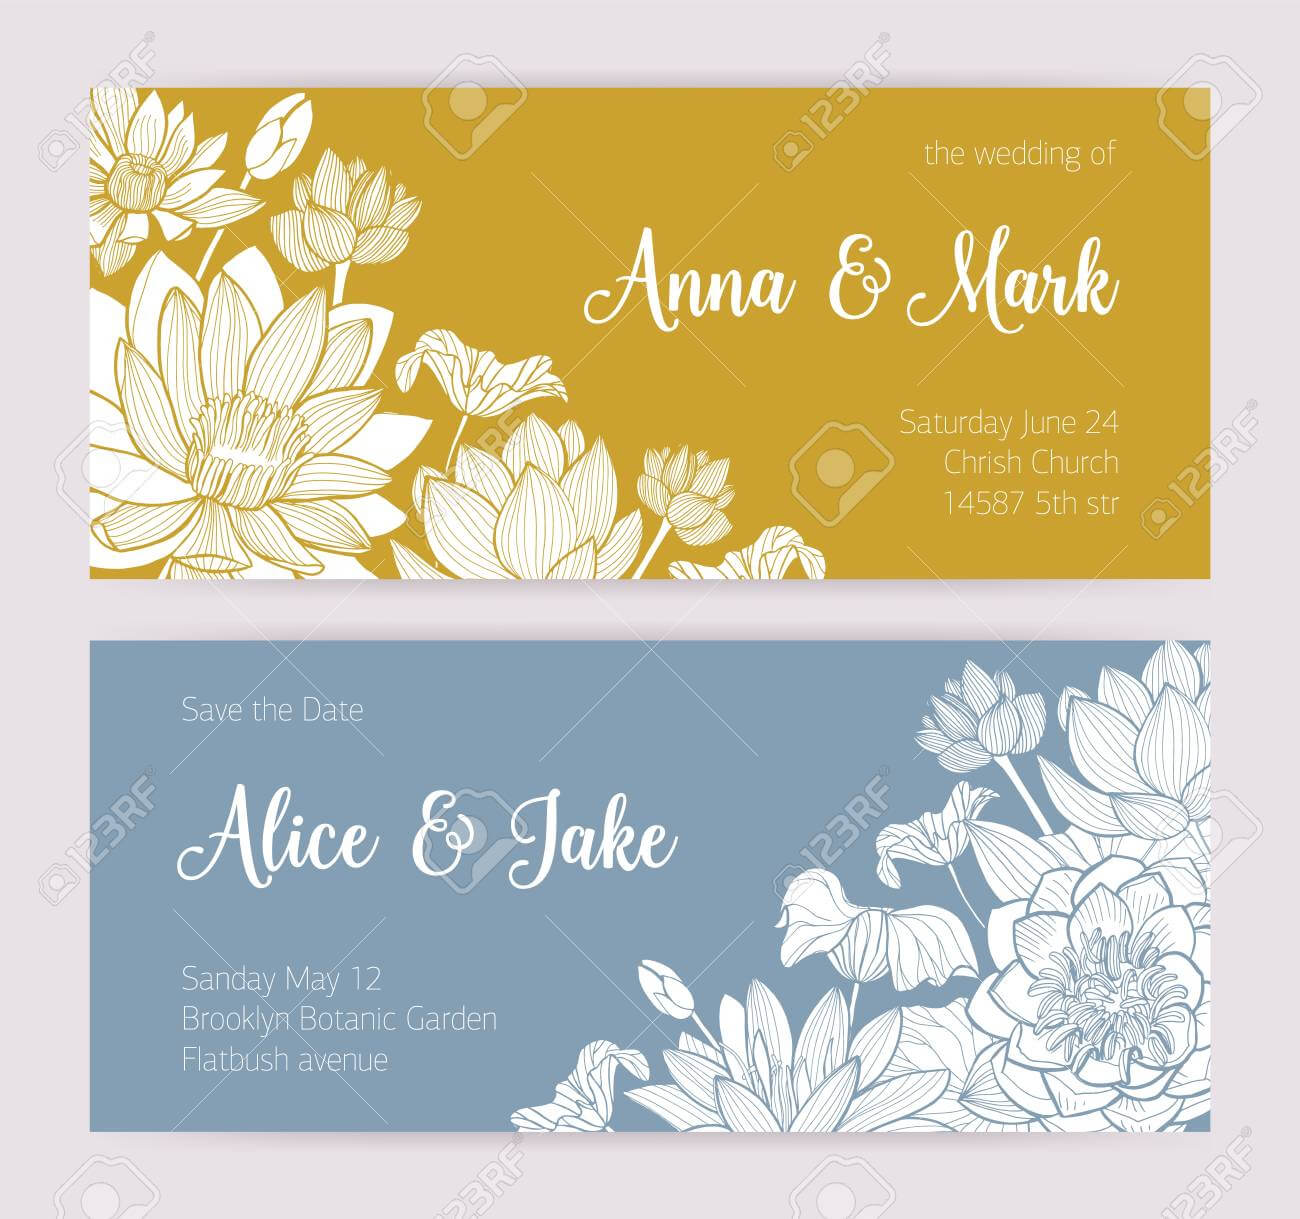 Elegant Wedding Invitation Or Save The Date Card Templates With.. Pertaining To Save The Date Cards Templates